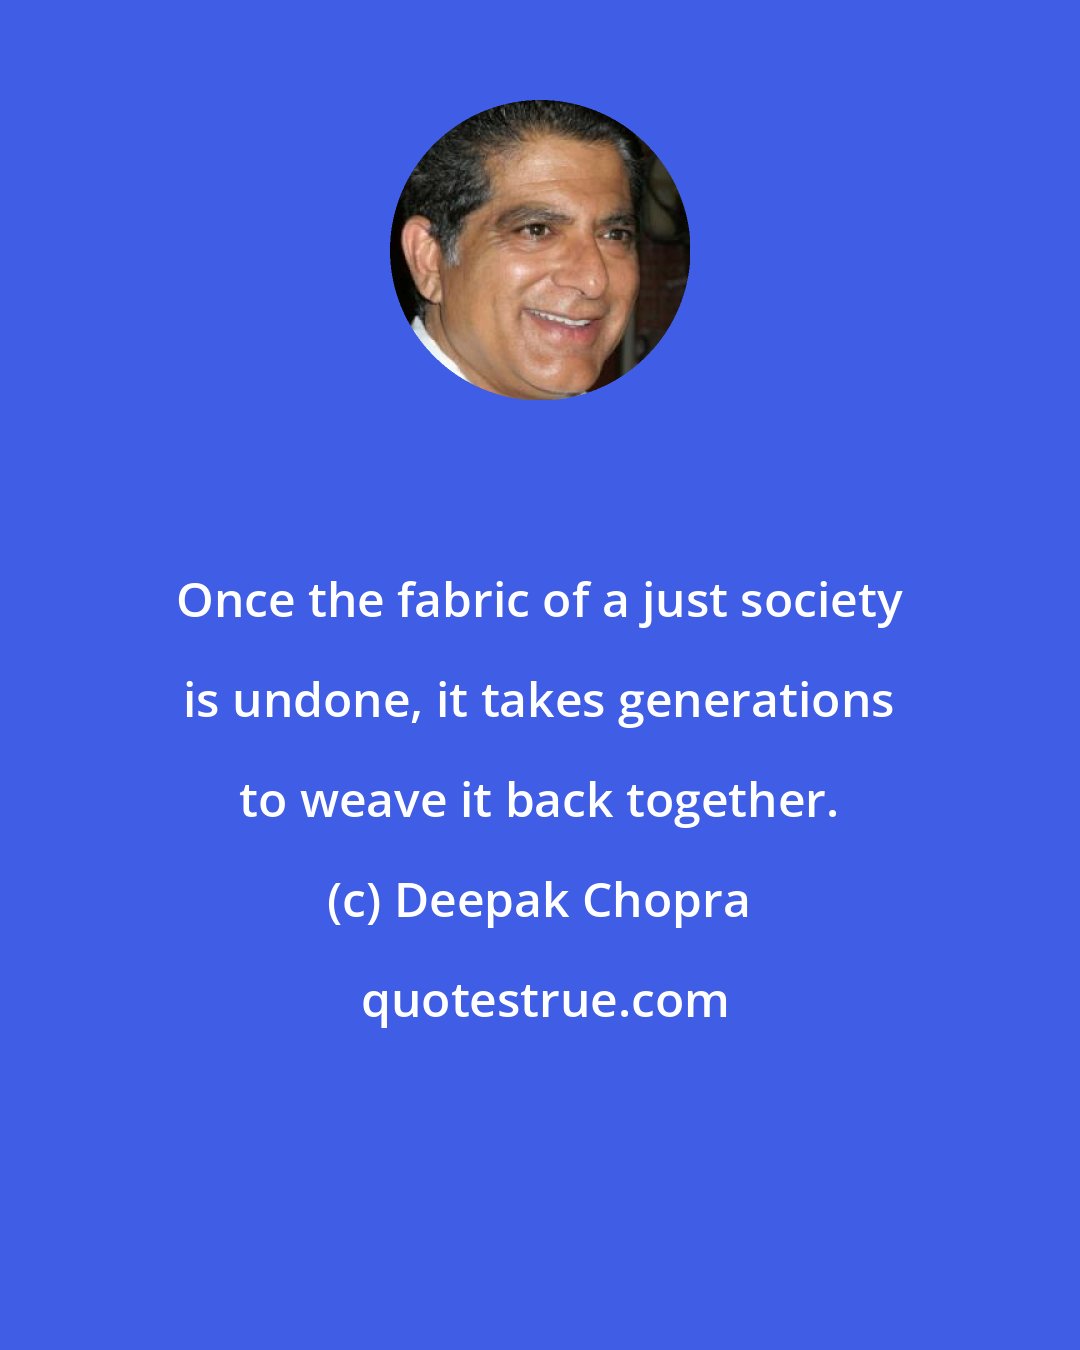 Deepak Chopra: Once the fabric of a just society is undone, it takes generations to weave it back together.